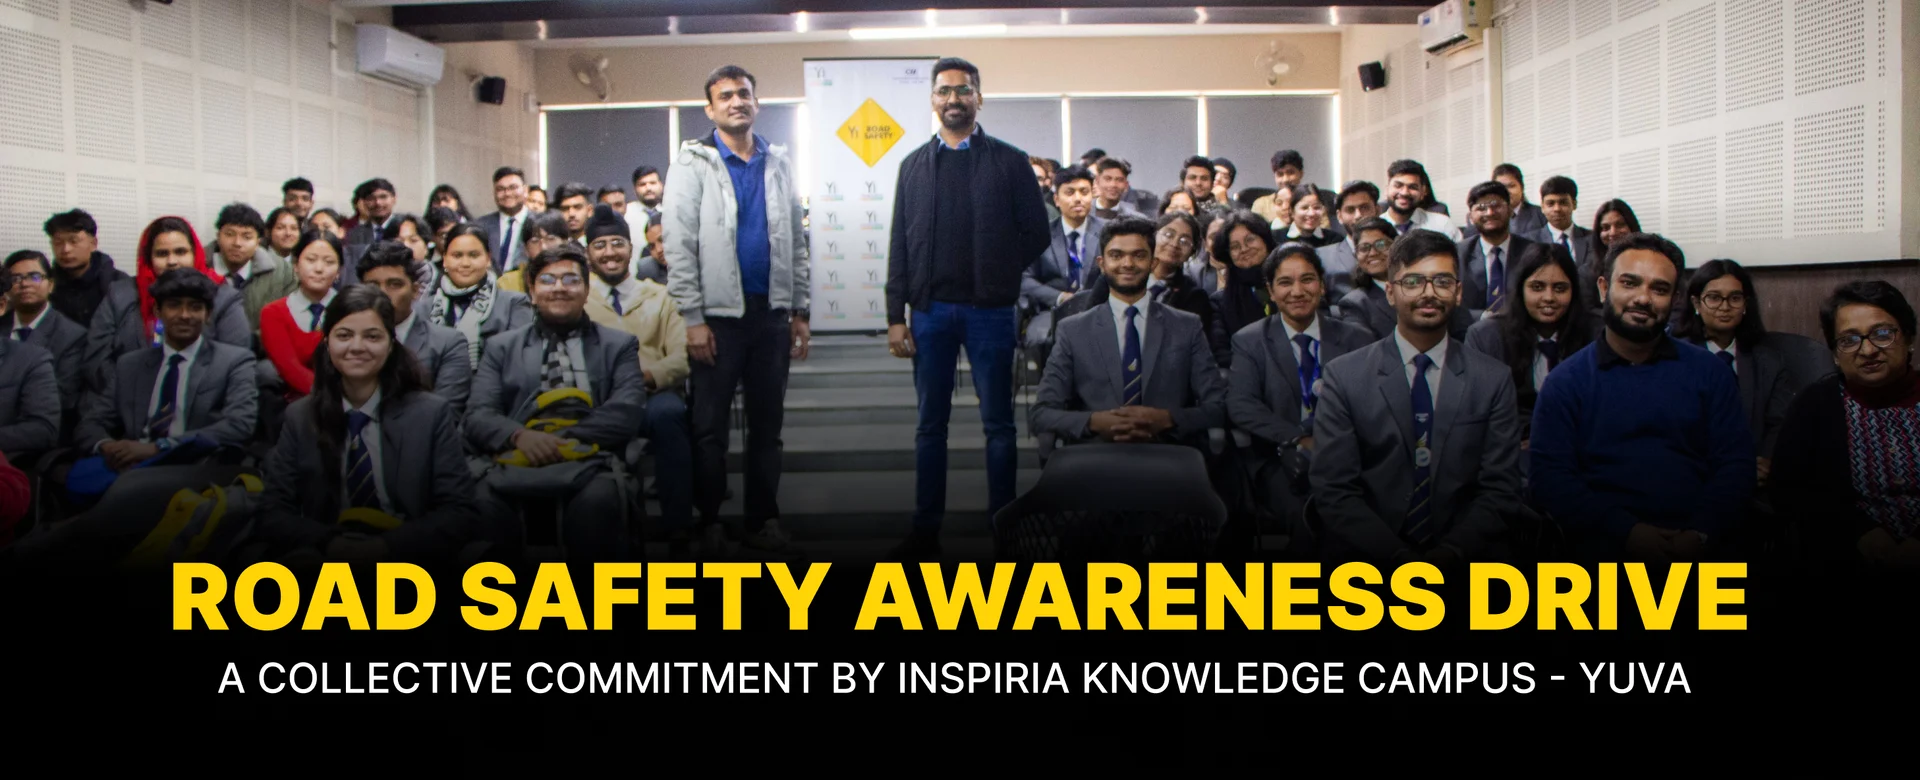 road safety awareness